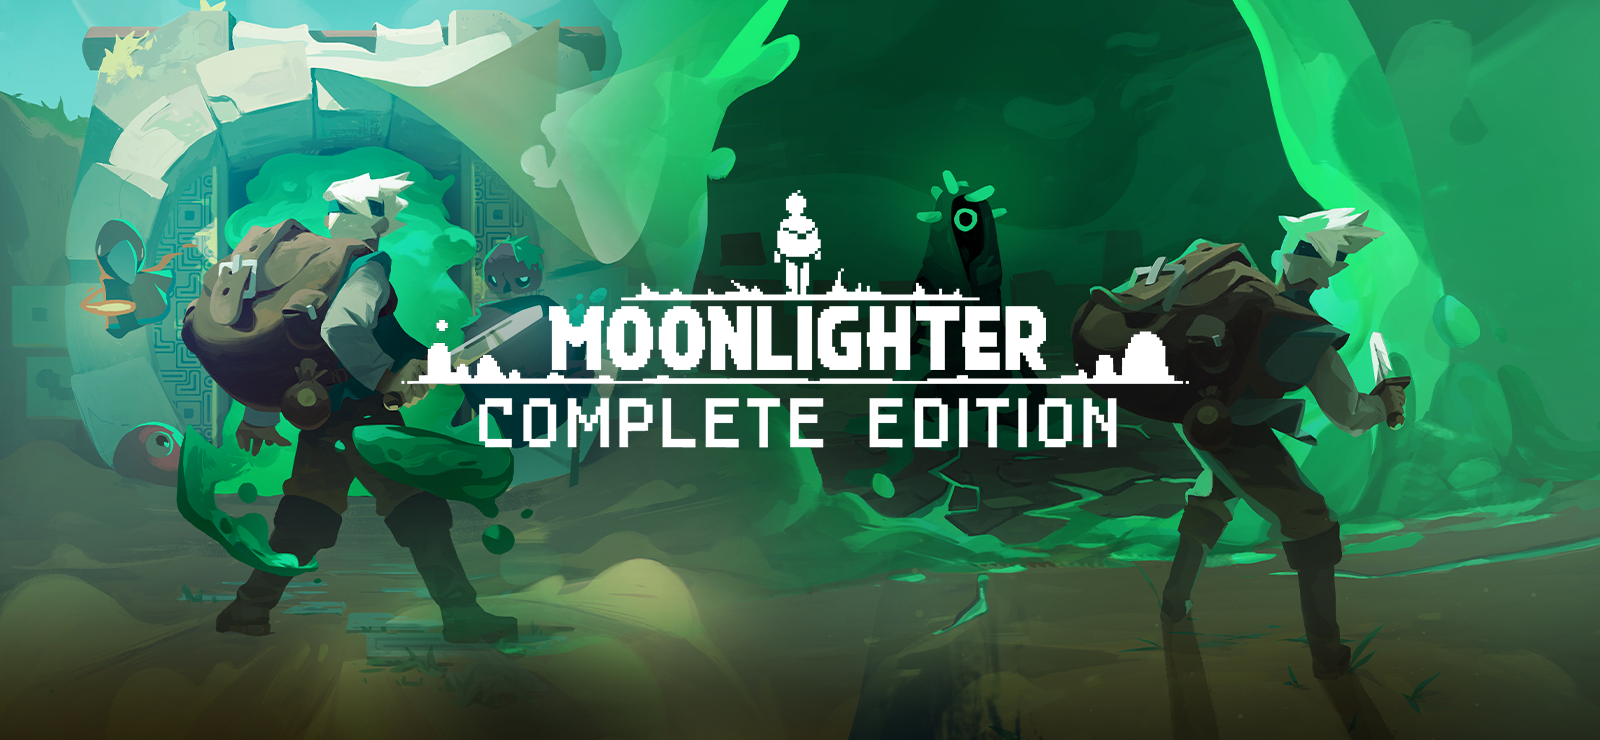 Moonlighter: Complete Edition